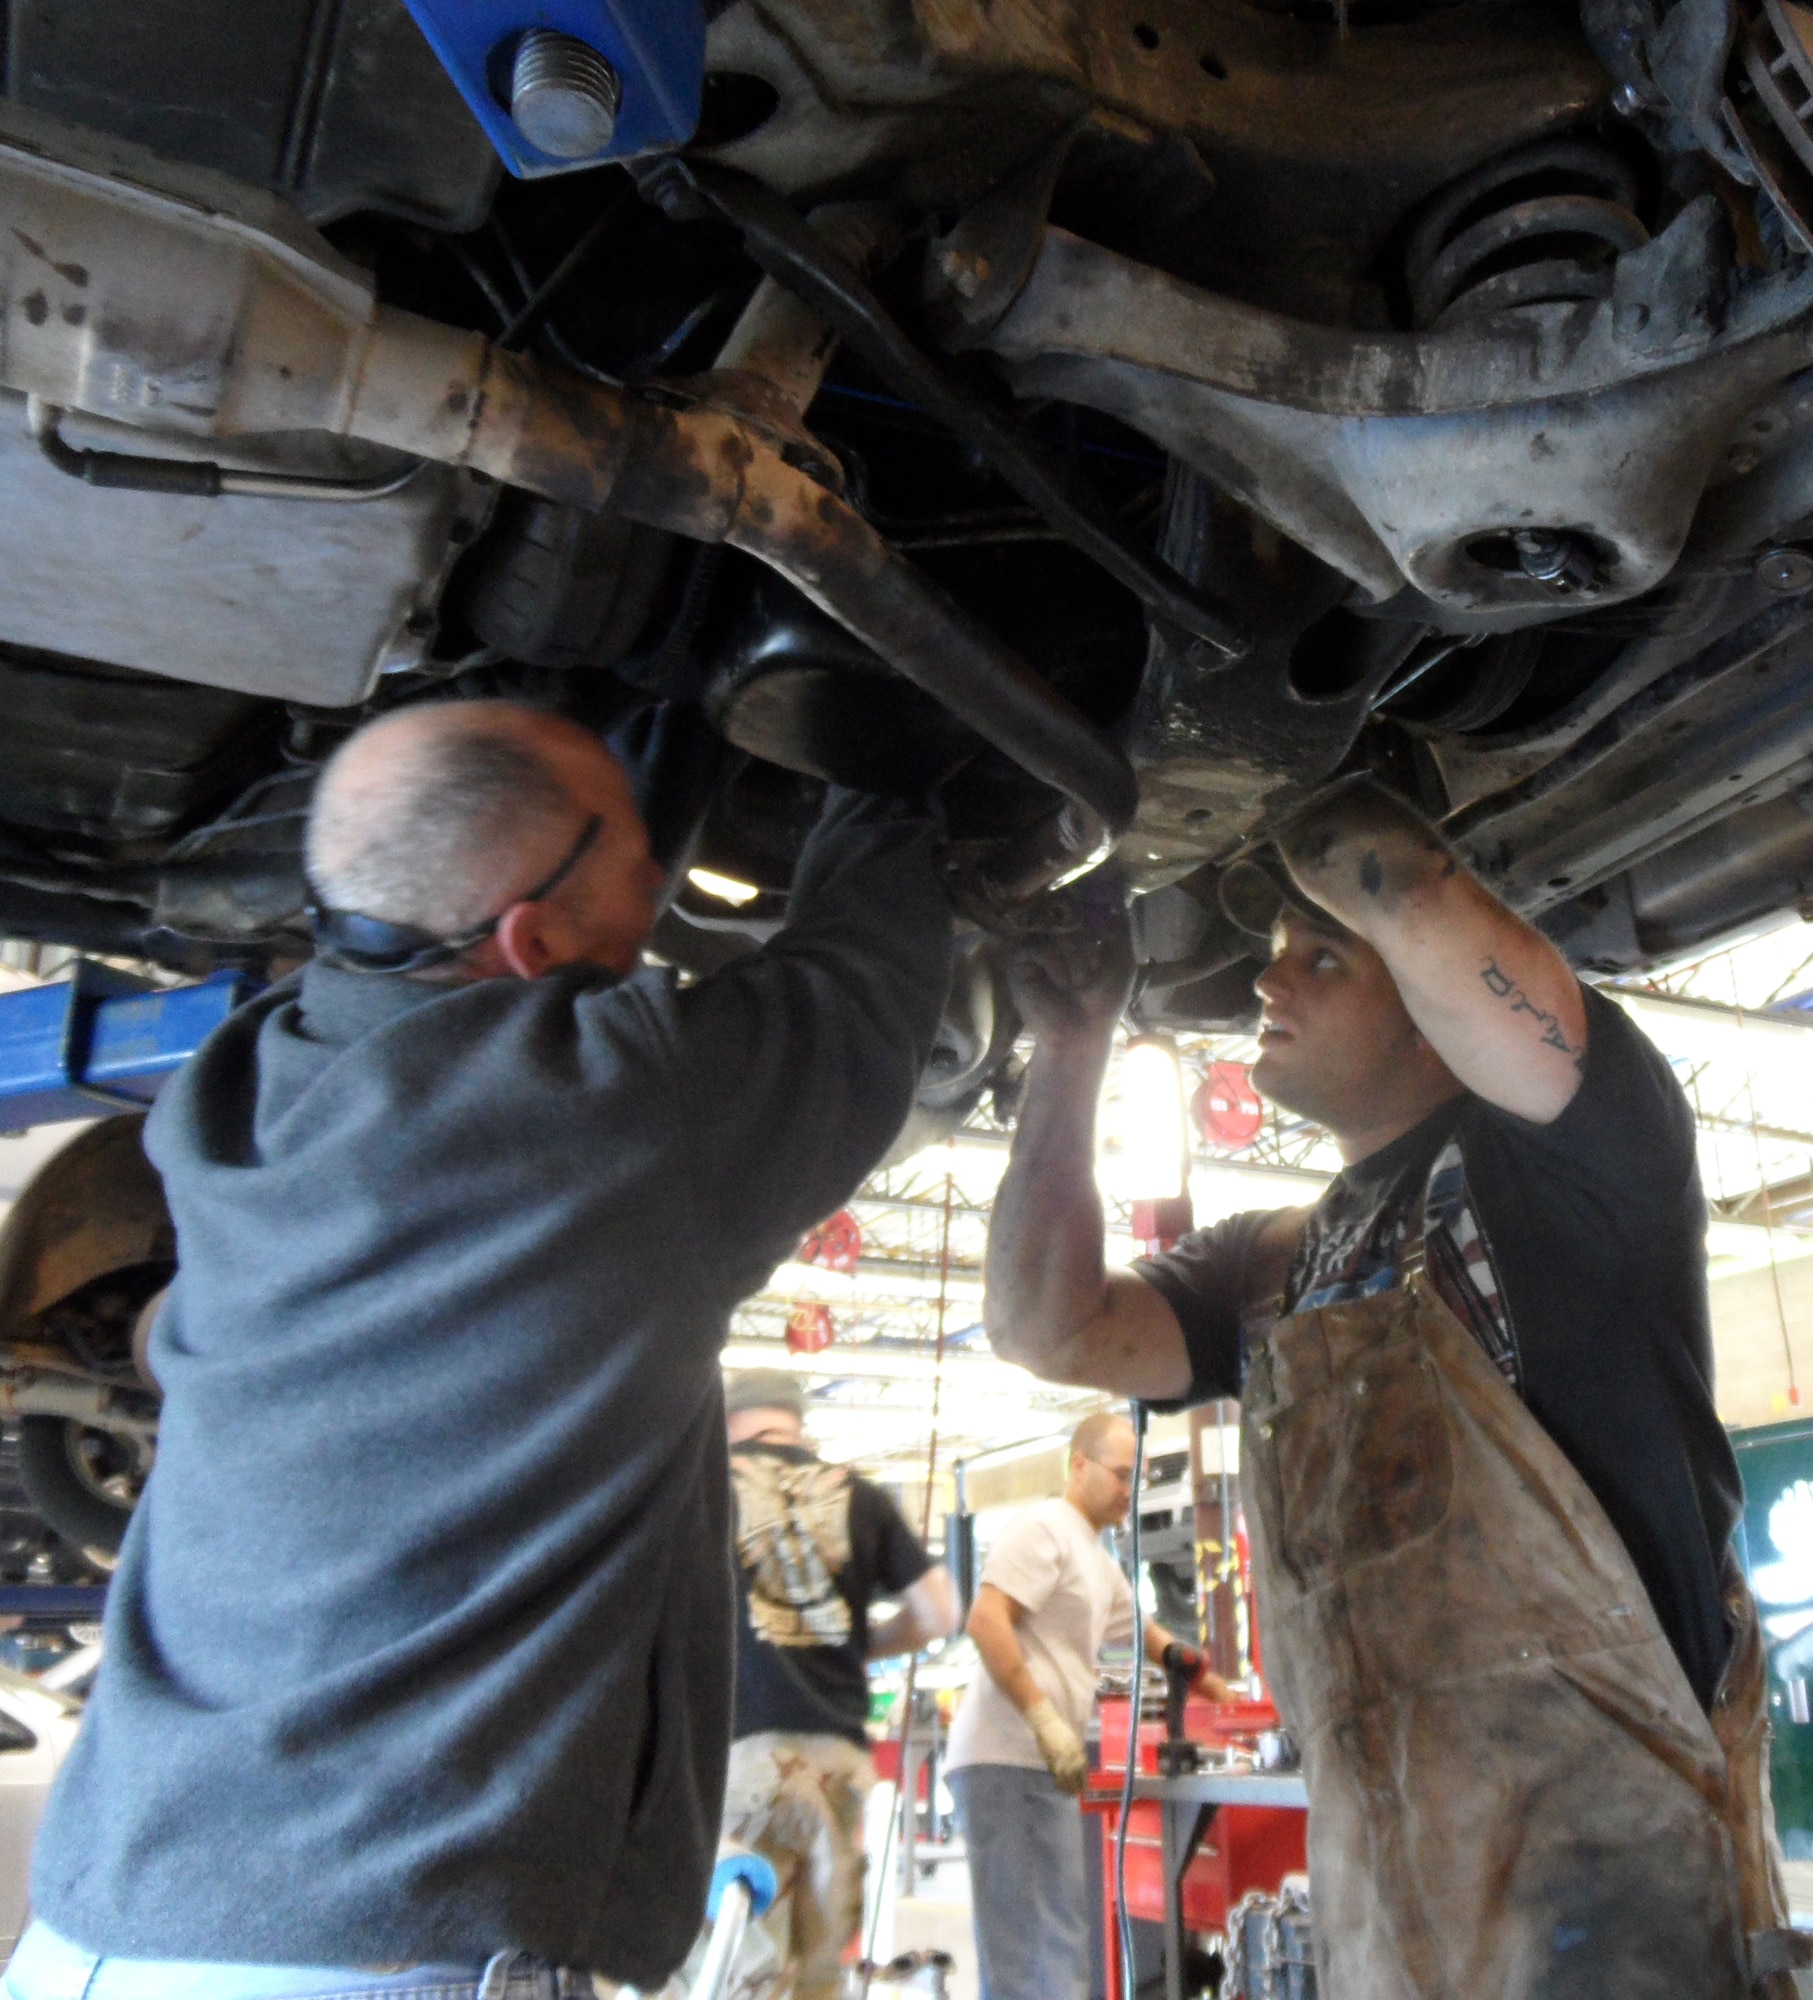 U.S. Air Force Staff Sgt. J.T. Oswald (right) and Chief Master Sgt. Kenneth Karnes (left), both 355th Equipment Maintenance Squadron, put the finishing touches on the oil pan of a 1984 Chevy Caprice Classic at the Auto Hobby Shop on Davis-Monthan Air Force Base, Ariz., Feb. 4. Squadron members are restoring the car using their own skills and funds. It will be presented to Tech. Sgt. Adrian Mapps, 355th EMS, once it is complete. (Courtesy photo/Released)